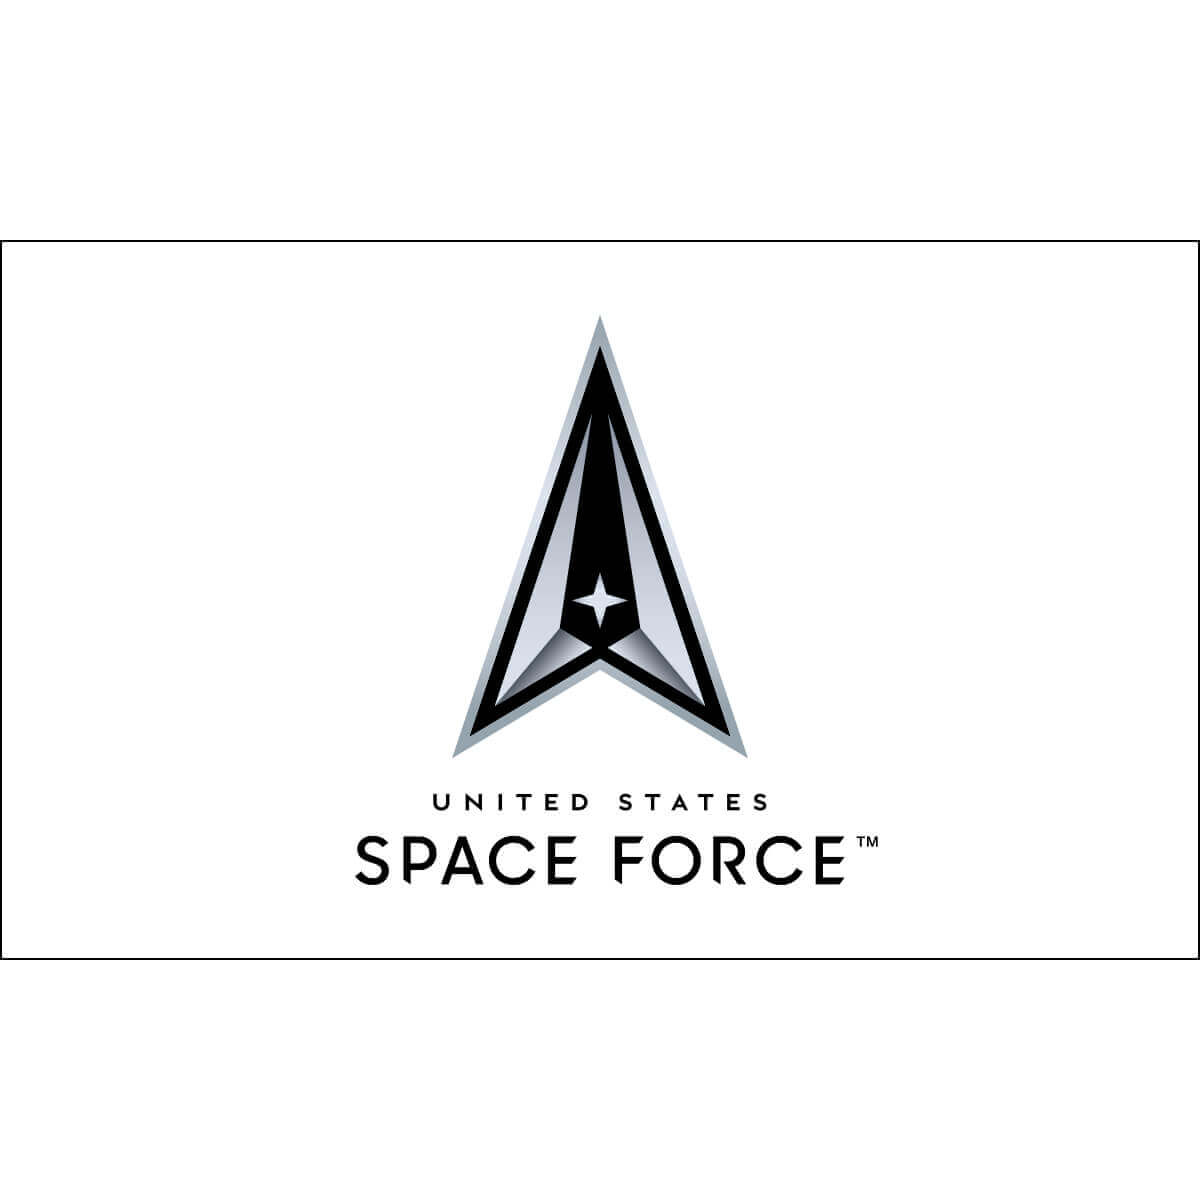 Space Force Official Military Service Branch Logo Nylon Outdoor Flag